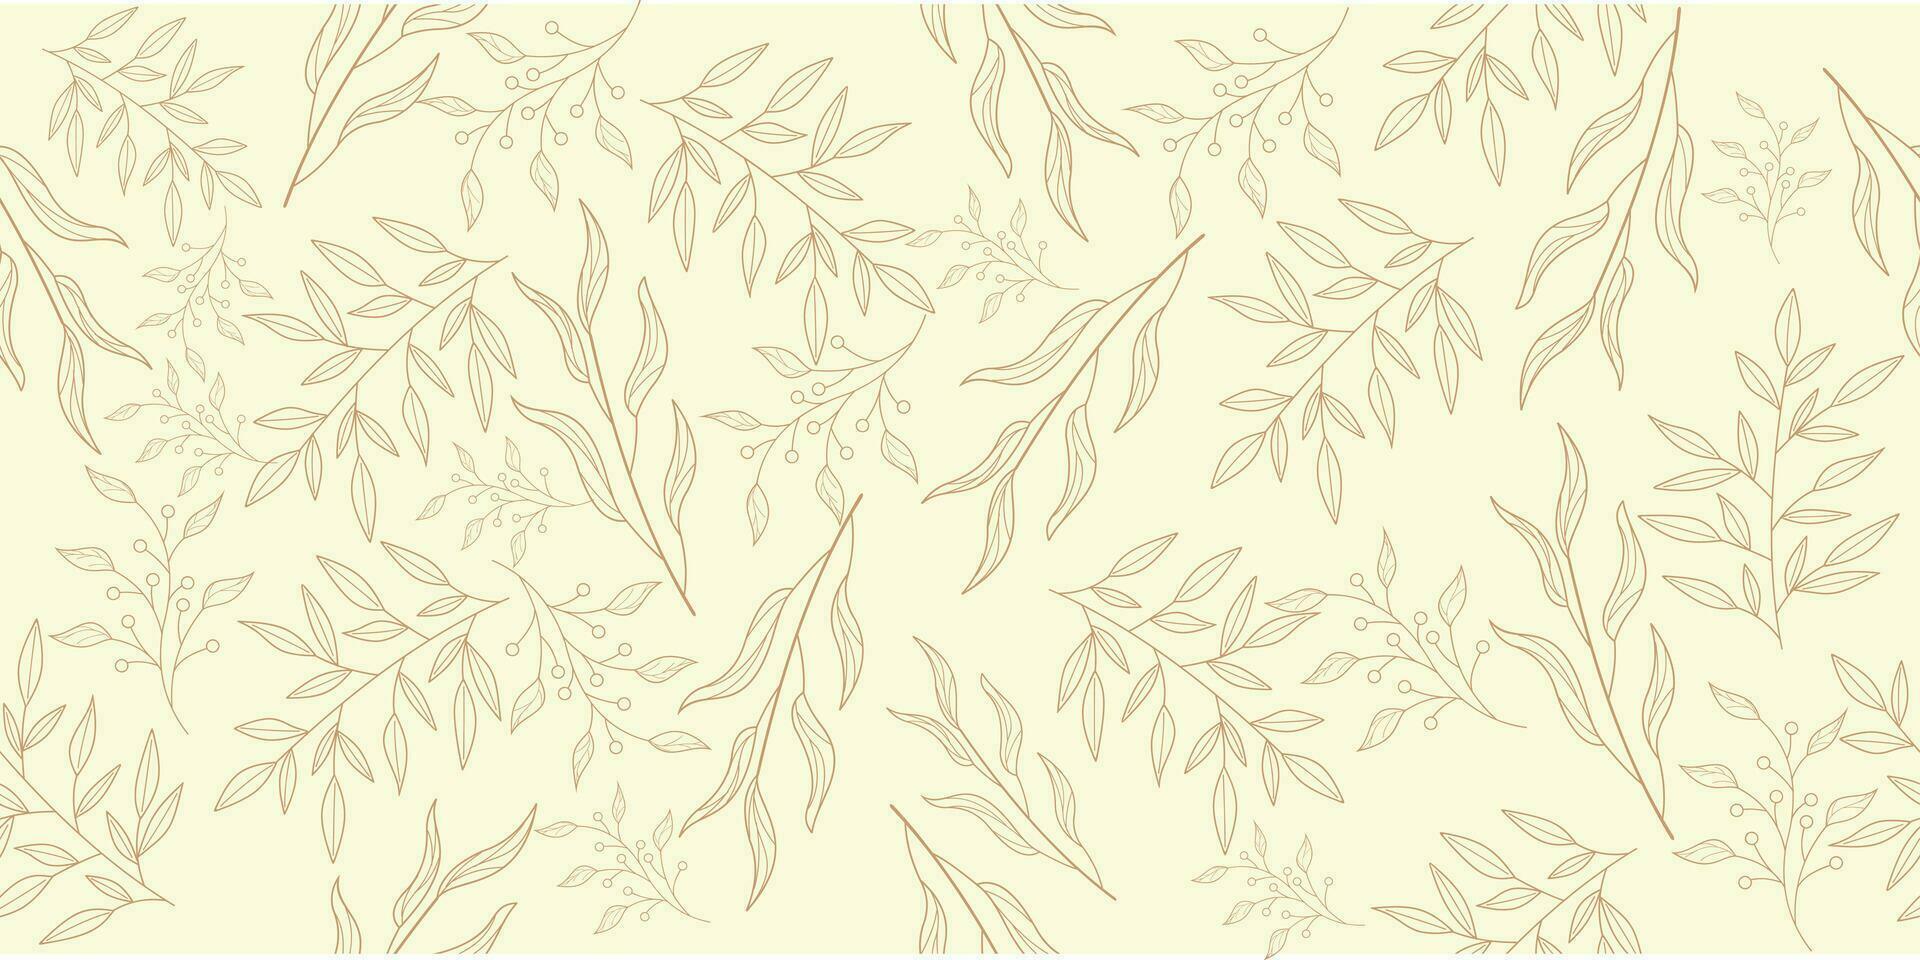 botanical seamless pattern with hand drawn leaf. Branch with leaves ornamental texture. texture set for fashion print design, wallpaper, wrapping paper, fabric, textile, background vector